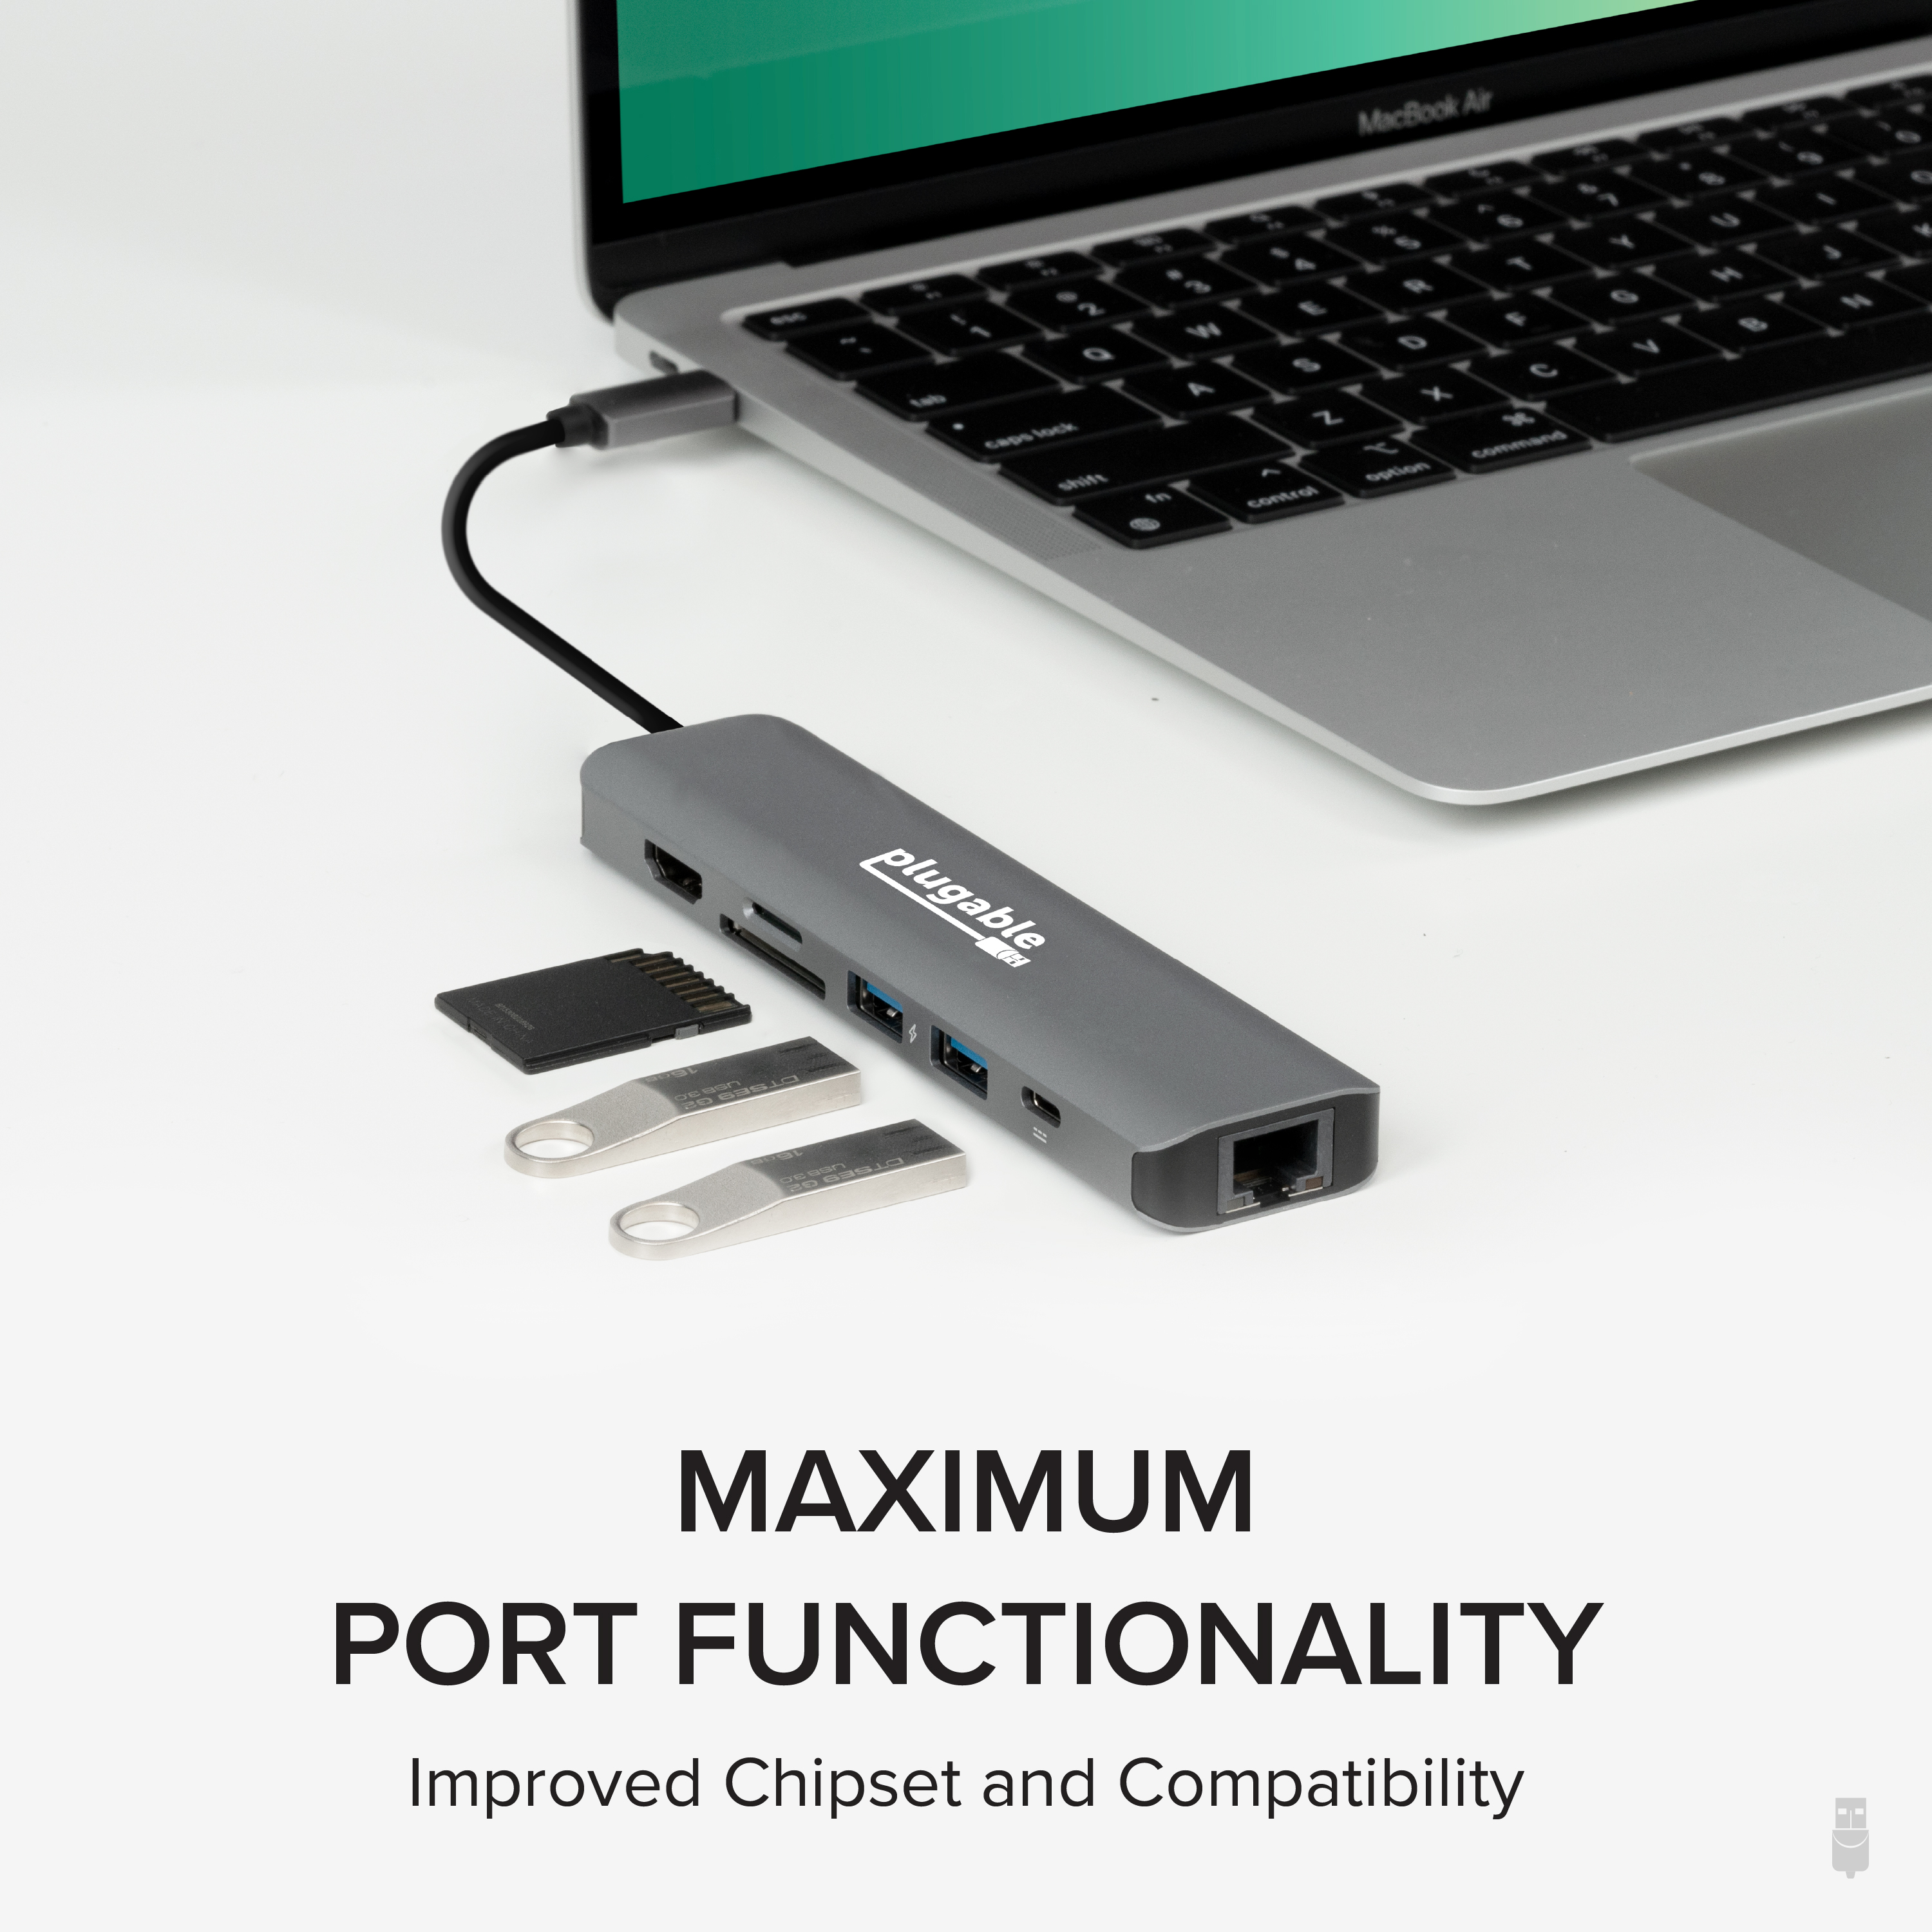 Plugable 7-in-1 USB C Docking Station with Ethernet - Driverless Compatibility with Mac, Windows, Chromebook, Dell XPS and Thunderbolt (100W Charging, Gigabit Ethernet, 4K HDMI, 2x USB, SD/microSD) - image 6 of 8